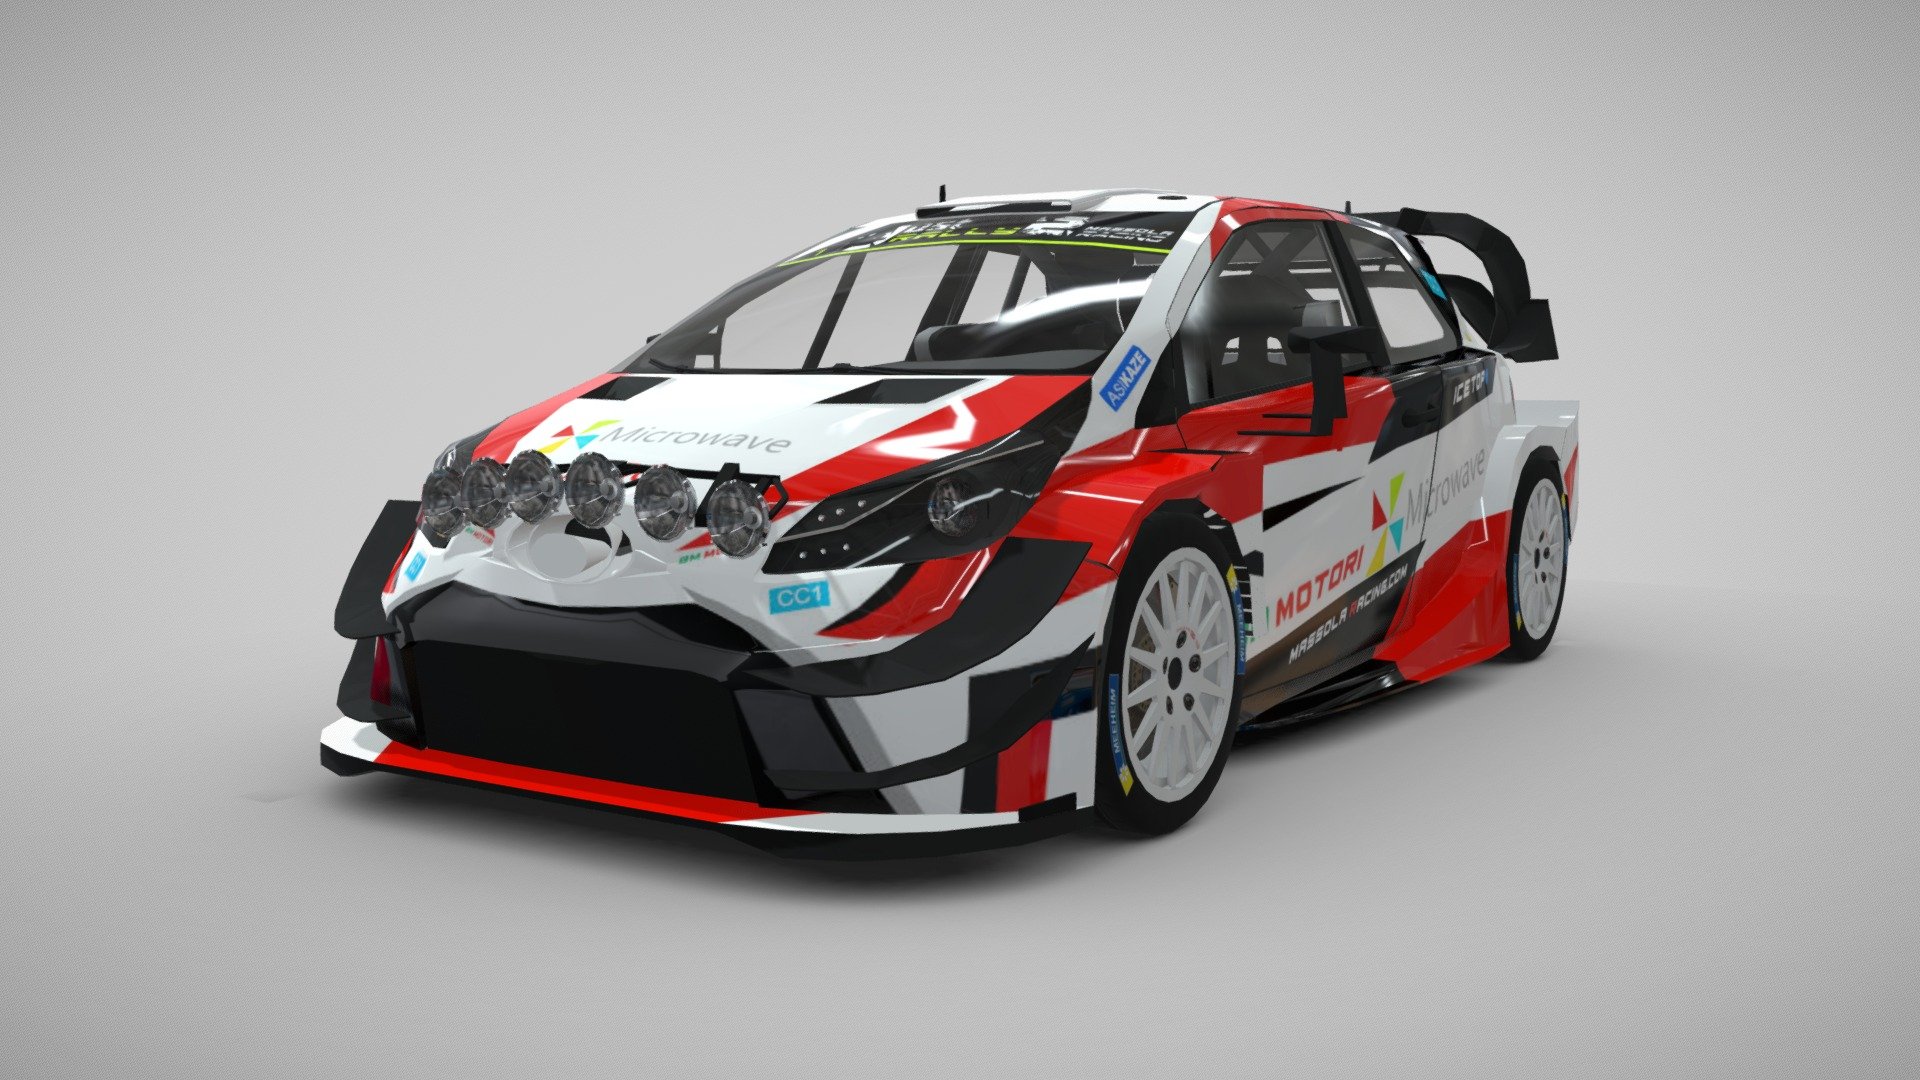 Get it in the Unity Asset Store!
A realistic rally car optimized for a mobile racing game with detailed interiors and single door, paradish, trunk objects to make them open/close or brake&hellip;

-You can find an UV Image and baked shadows to make your own livery designs!:) - Rally Car Pro 2 - 3D model by Massola Racing (@massolaracing) 3d model